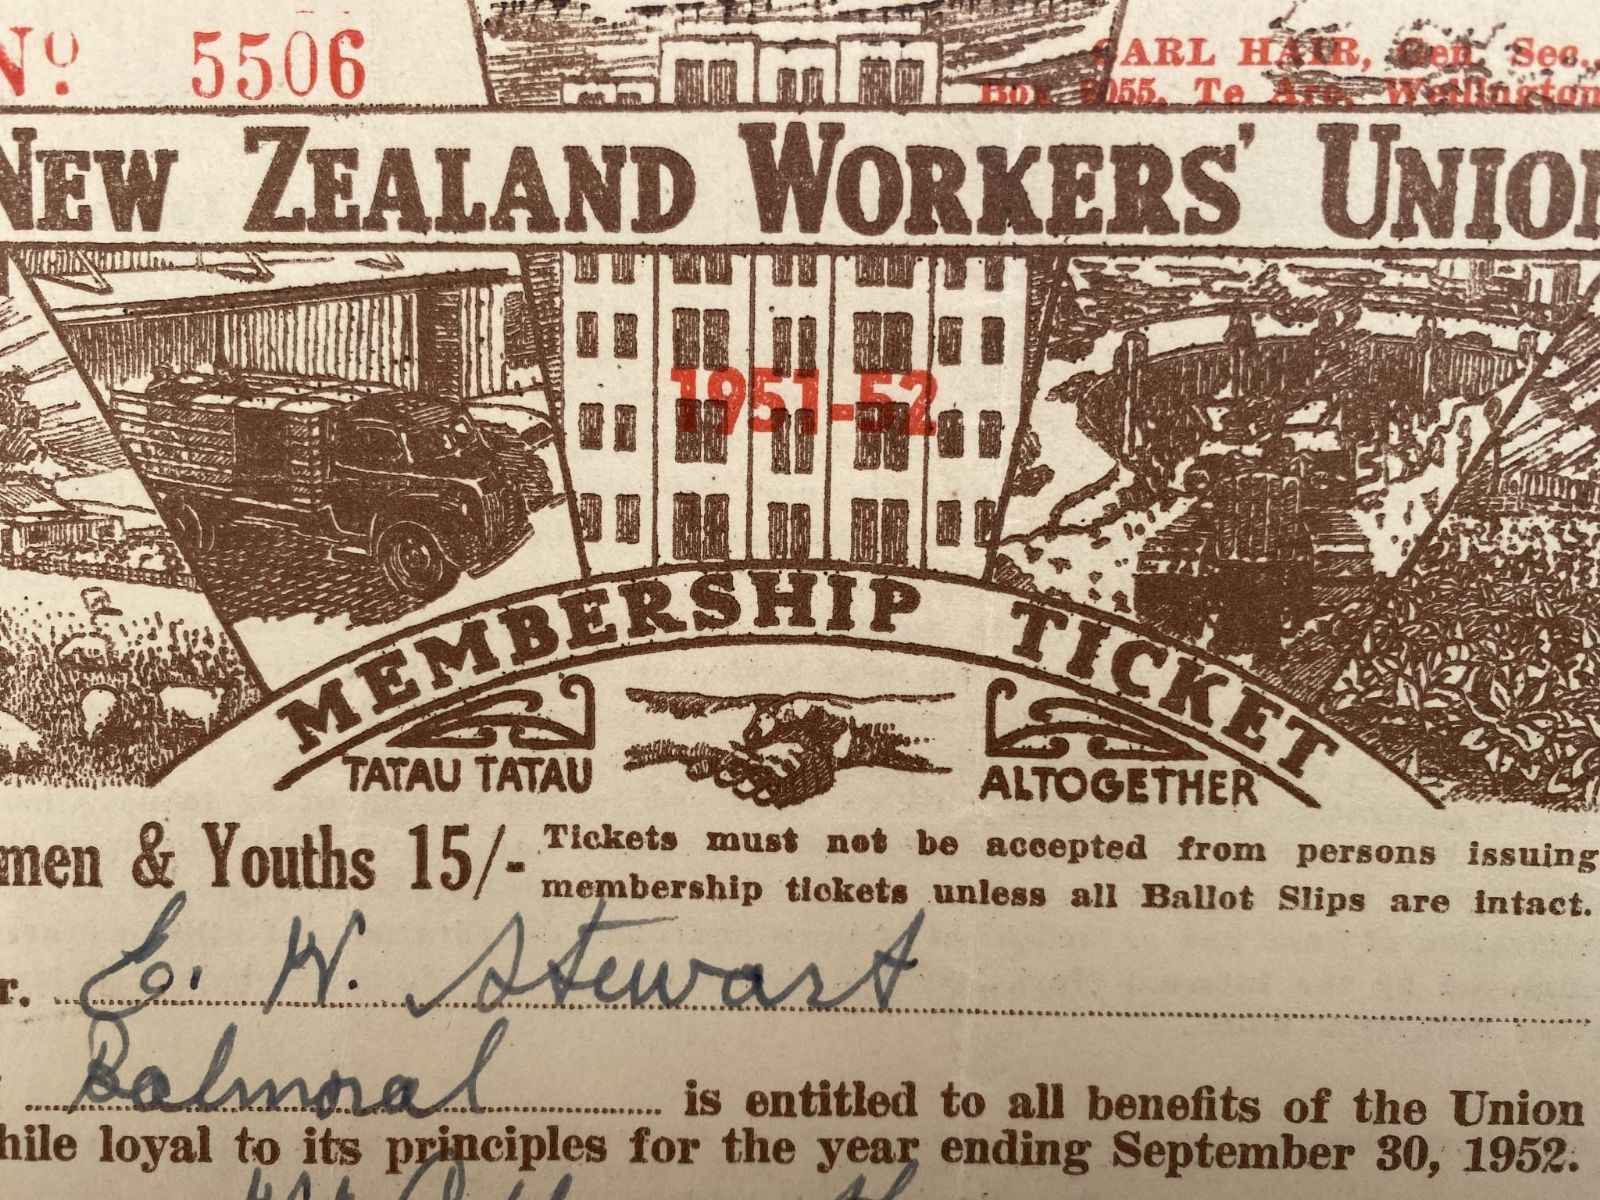 OLD MEMBERSHIP: New Zealand Workers Union - Women & Youths 1951-1952